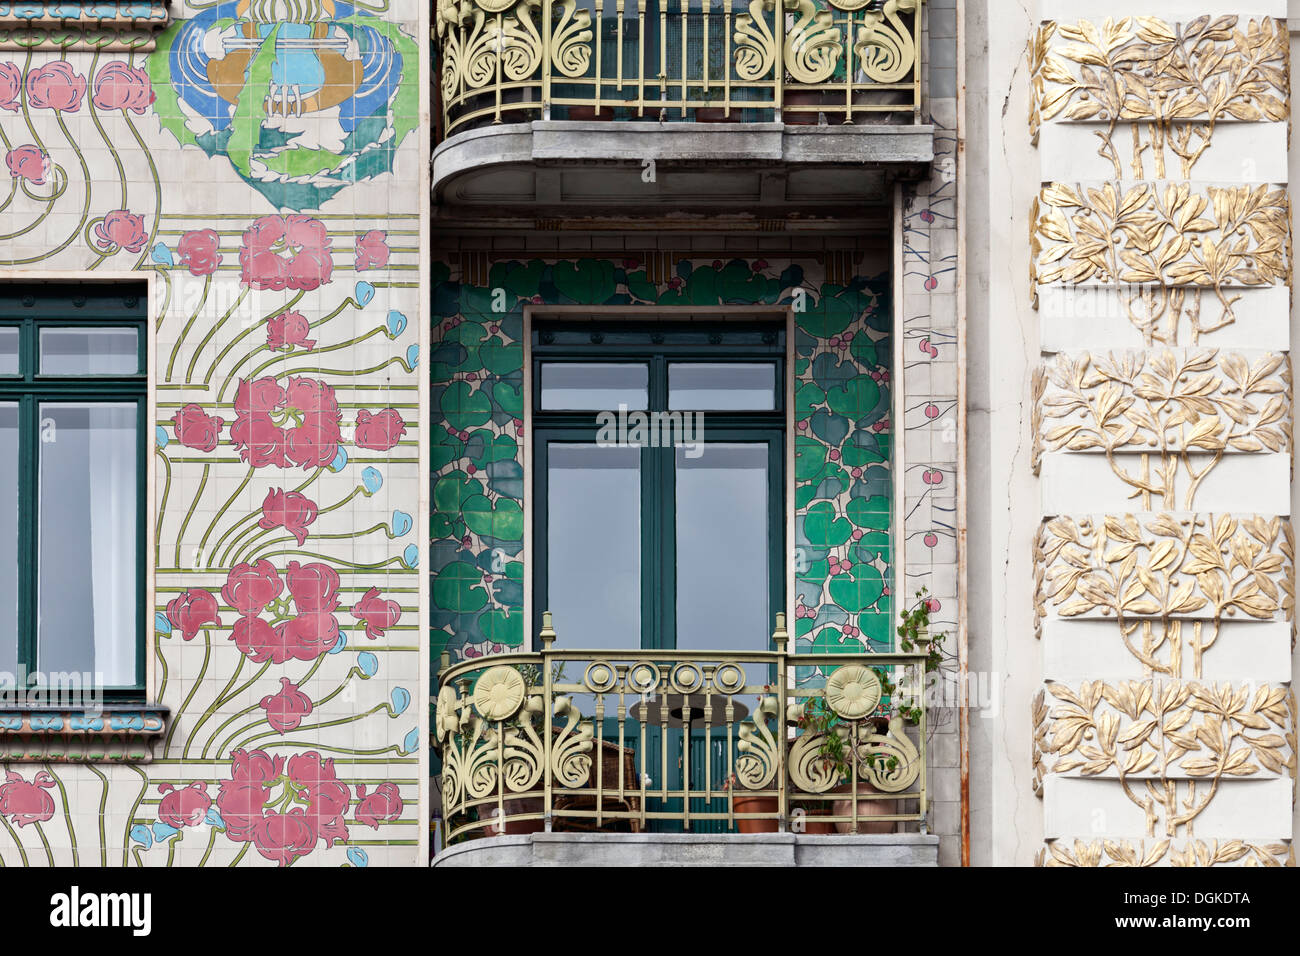 Facade of Otto Wagner's Majolikahaus house at No. 40 Linke Wienzeile in Vienna. Stock Photo